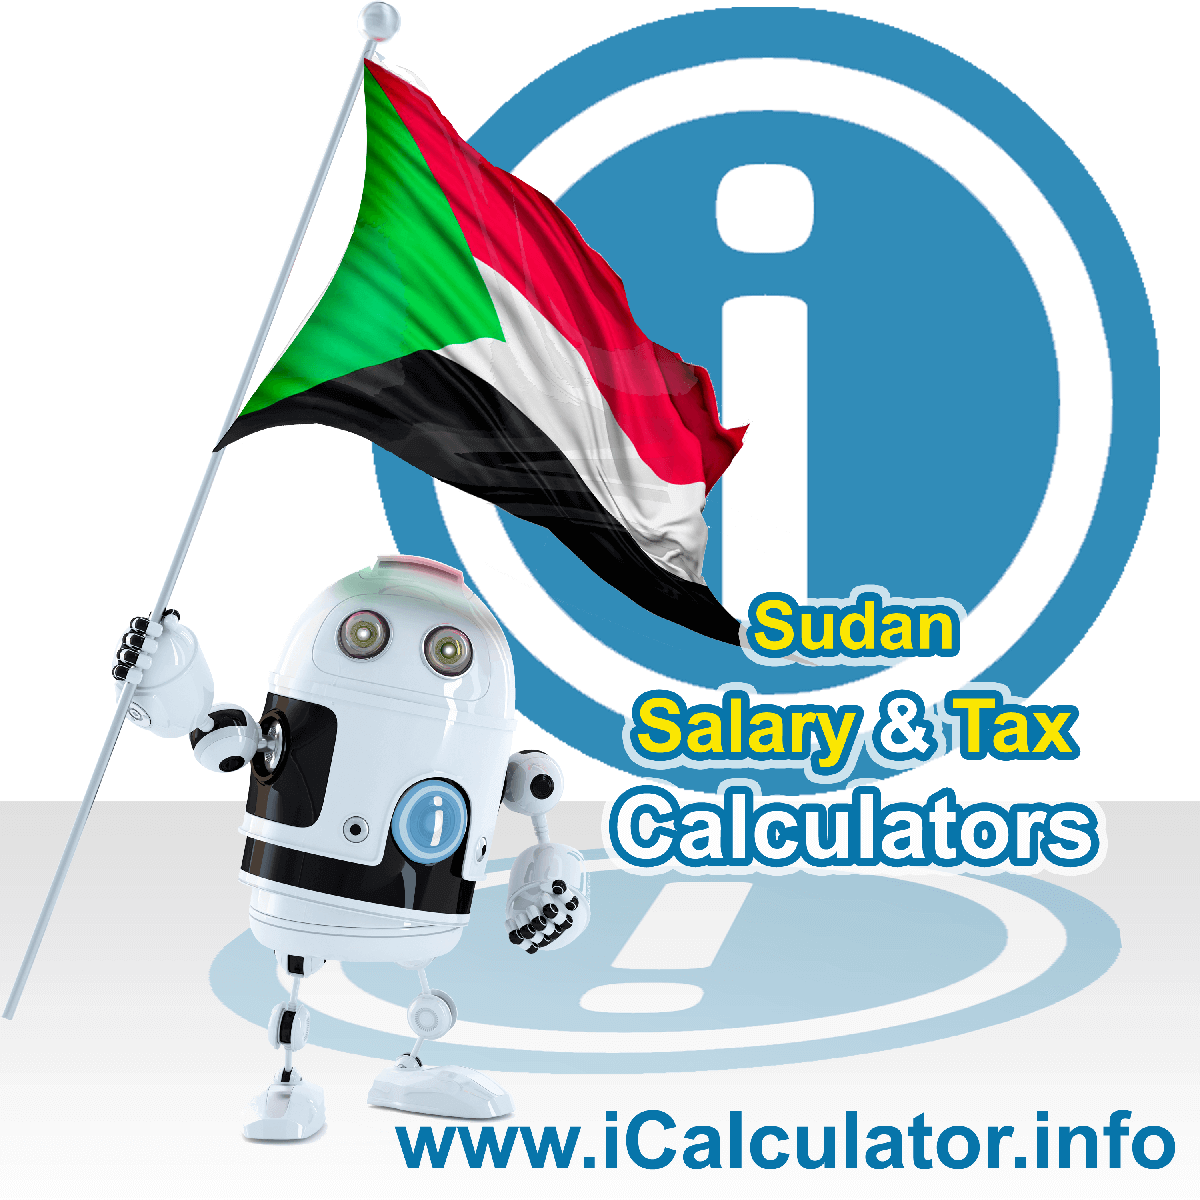 Sudan Tax Calculator. This image shows the Sudan flag and information relating to the tax formula for the Sudan Salary Calculator